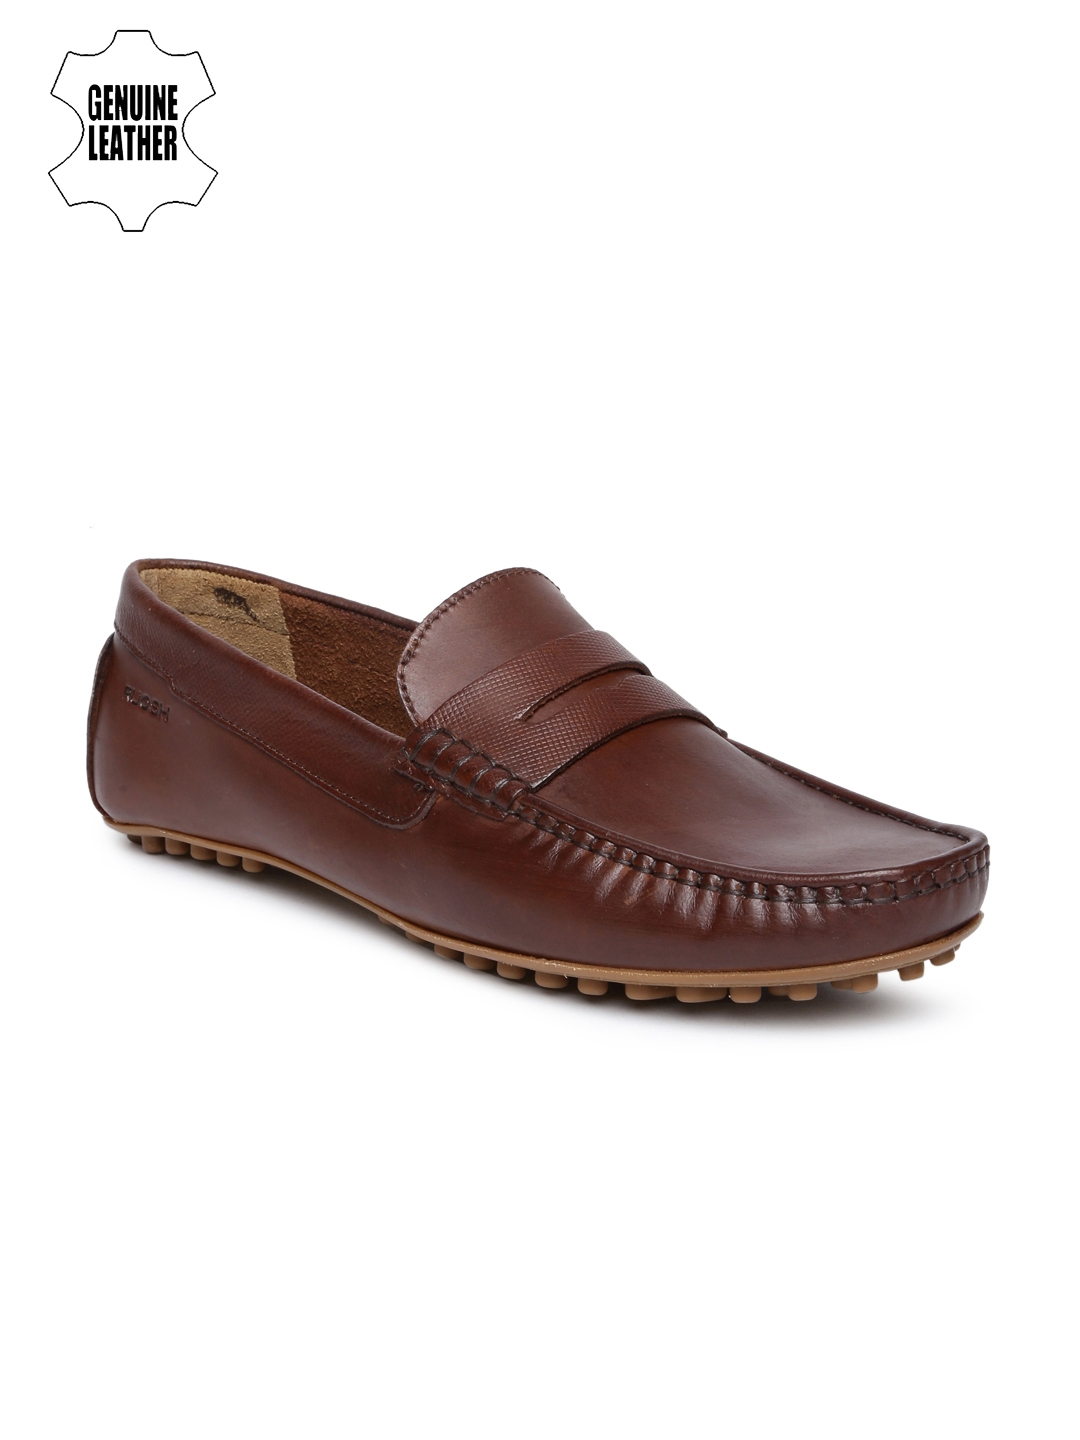 roush loafers